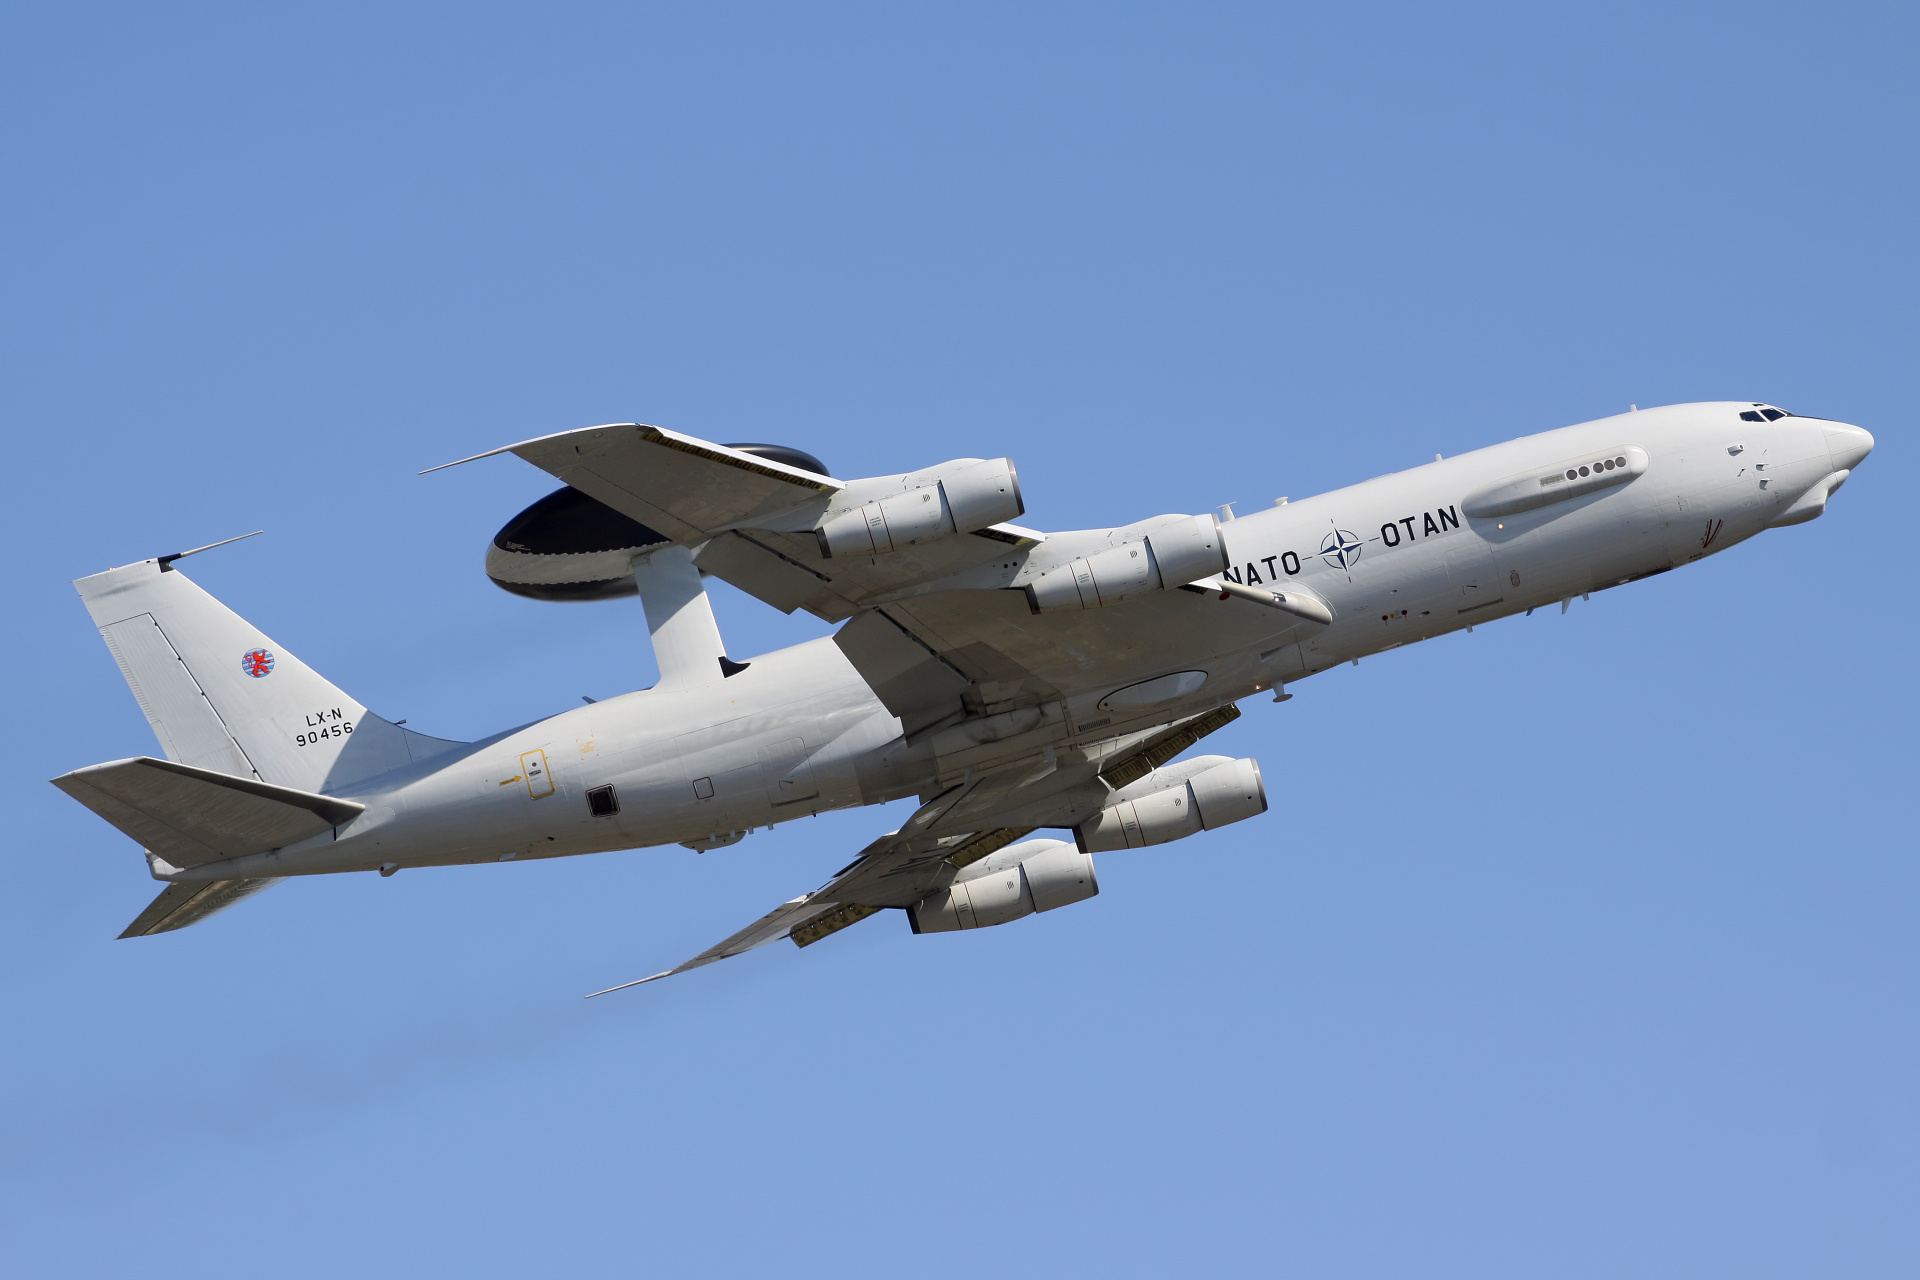 LX-N 90456, NATO Airborne Early Warning Force (Aircraft » EPWA Spotting » Boeing E-3A Sentry)